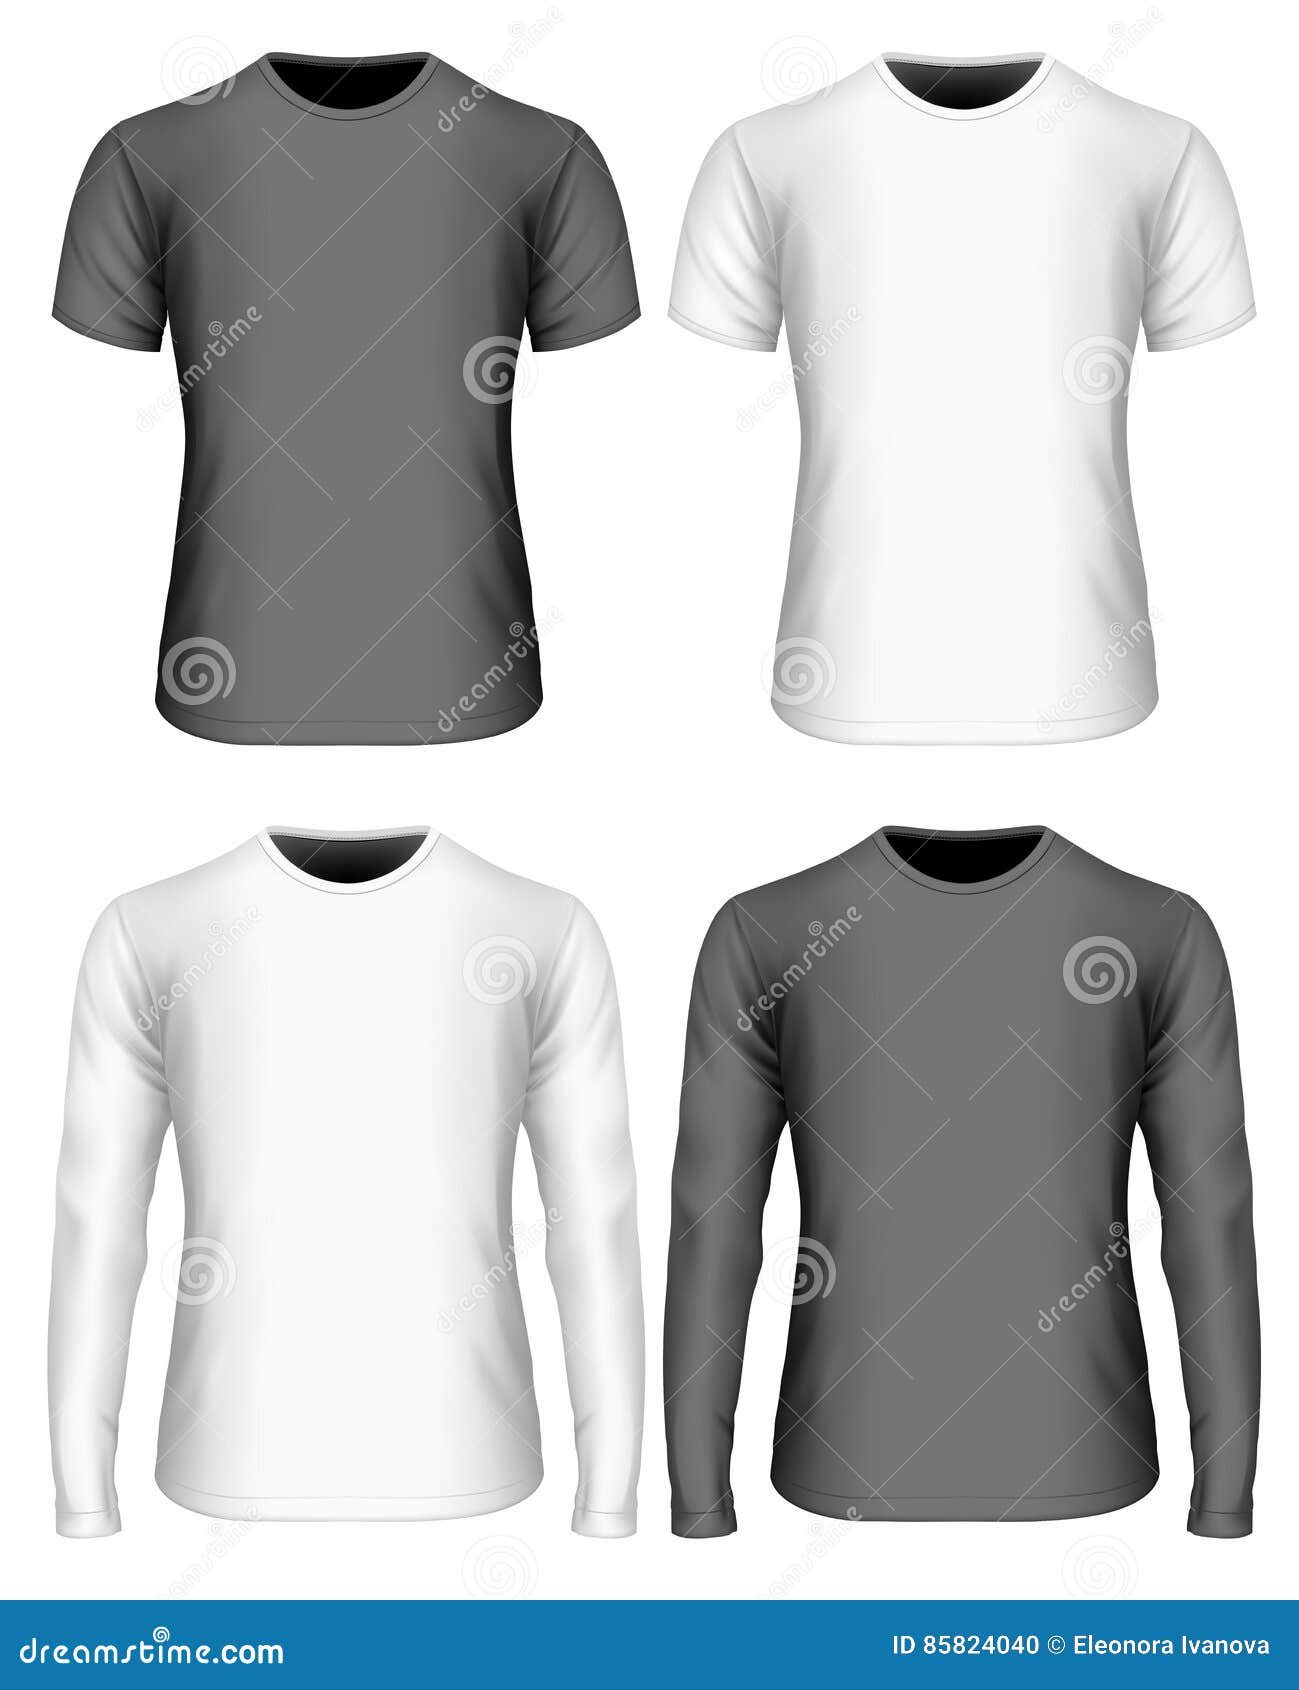 long-sleeved and short-sleeved variants of t-shirt